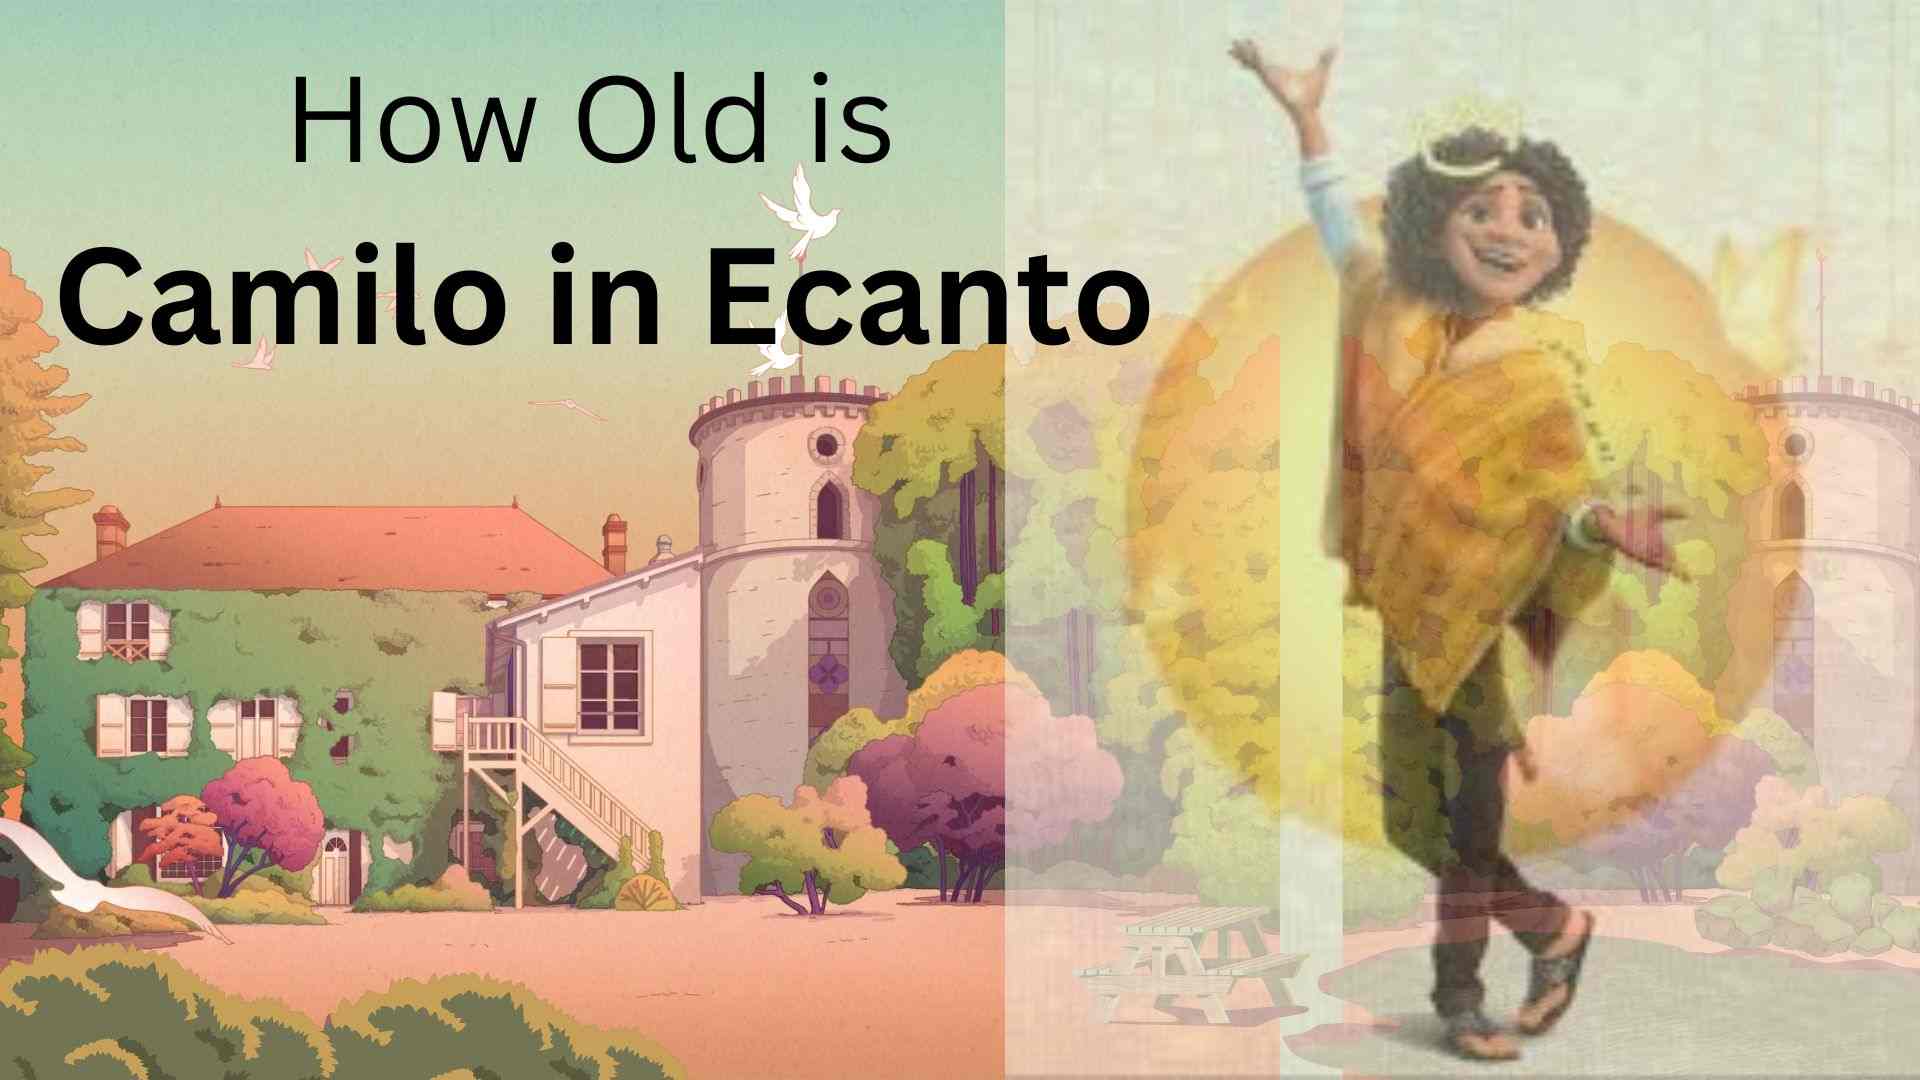 How Old is Camilo in Ecanto